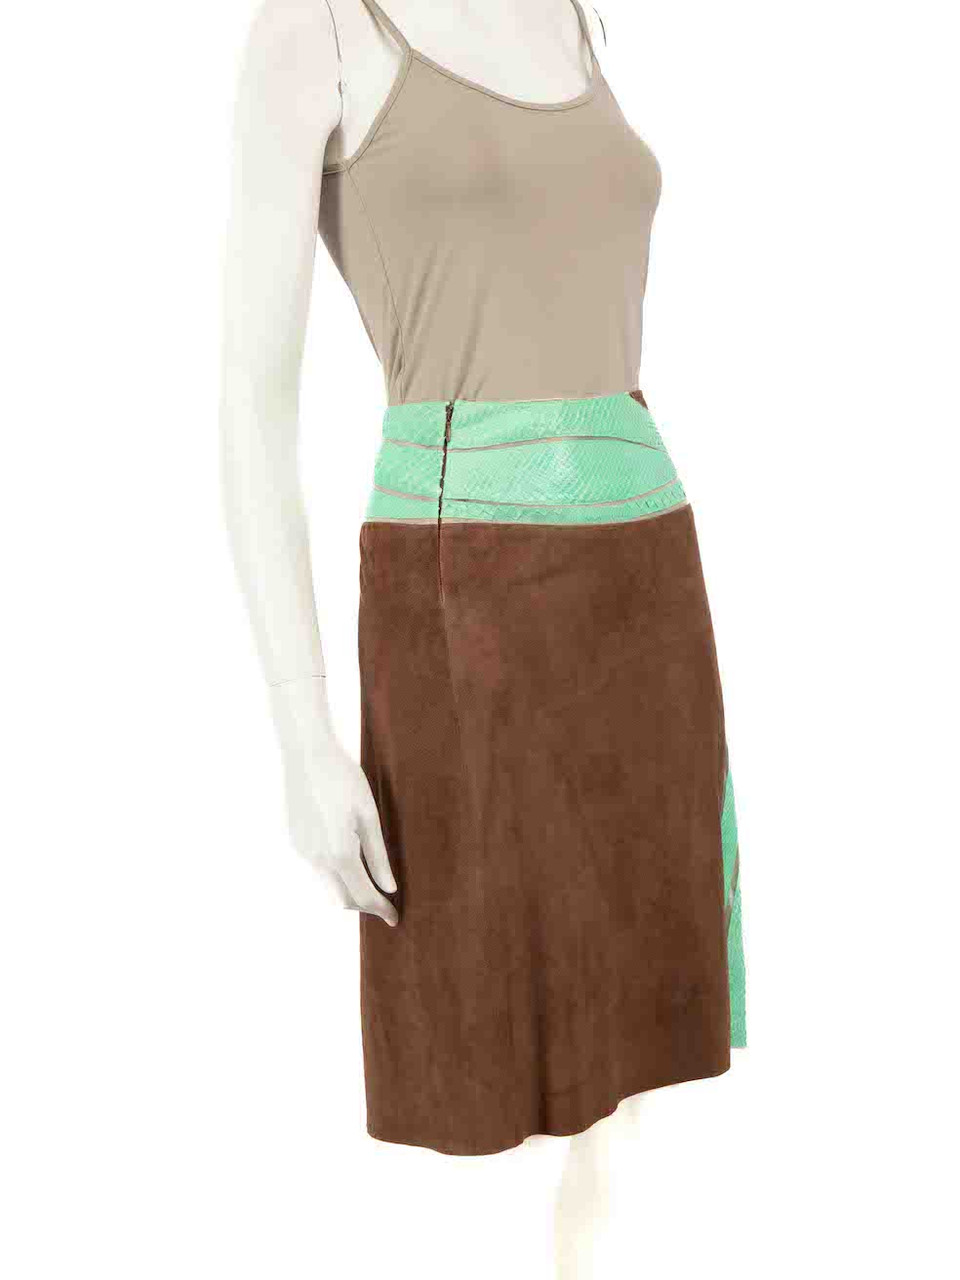 Versace Gianni Versace Vintage Brown Suede Python Leather Panelled Skirt